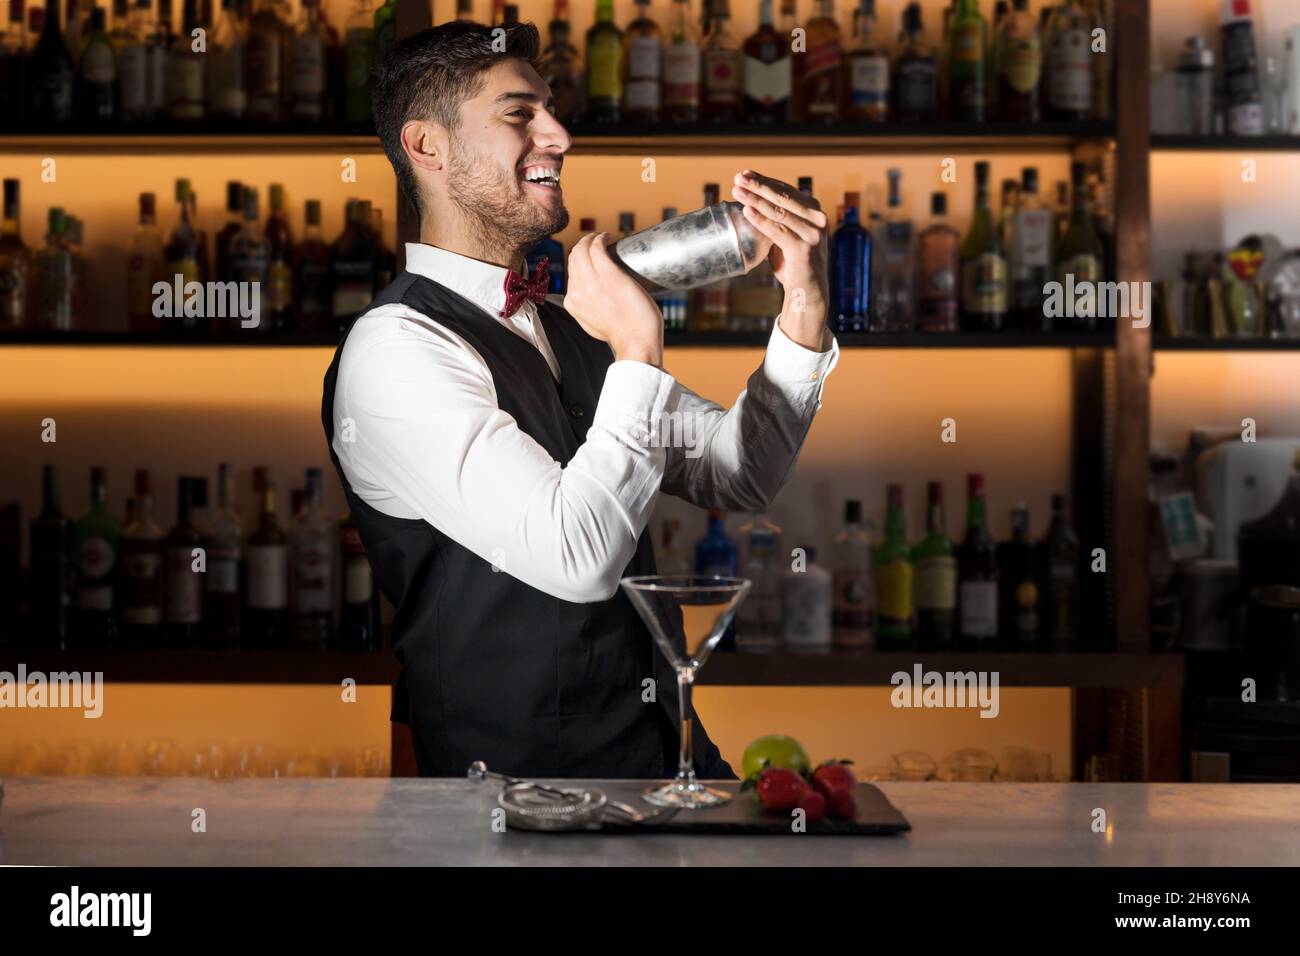 Cool professional bartender making a cocktail, shaking a cocktail shaker.  Authentic barman making alcohol beverages in modern bar. High quality photo  Stock Photo - Alamy